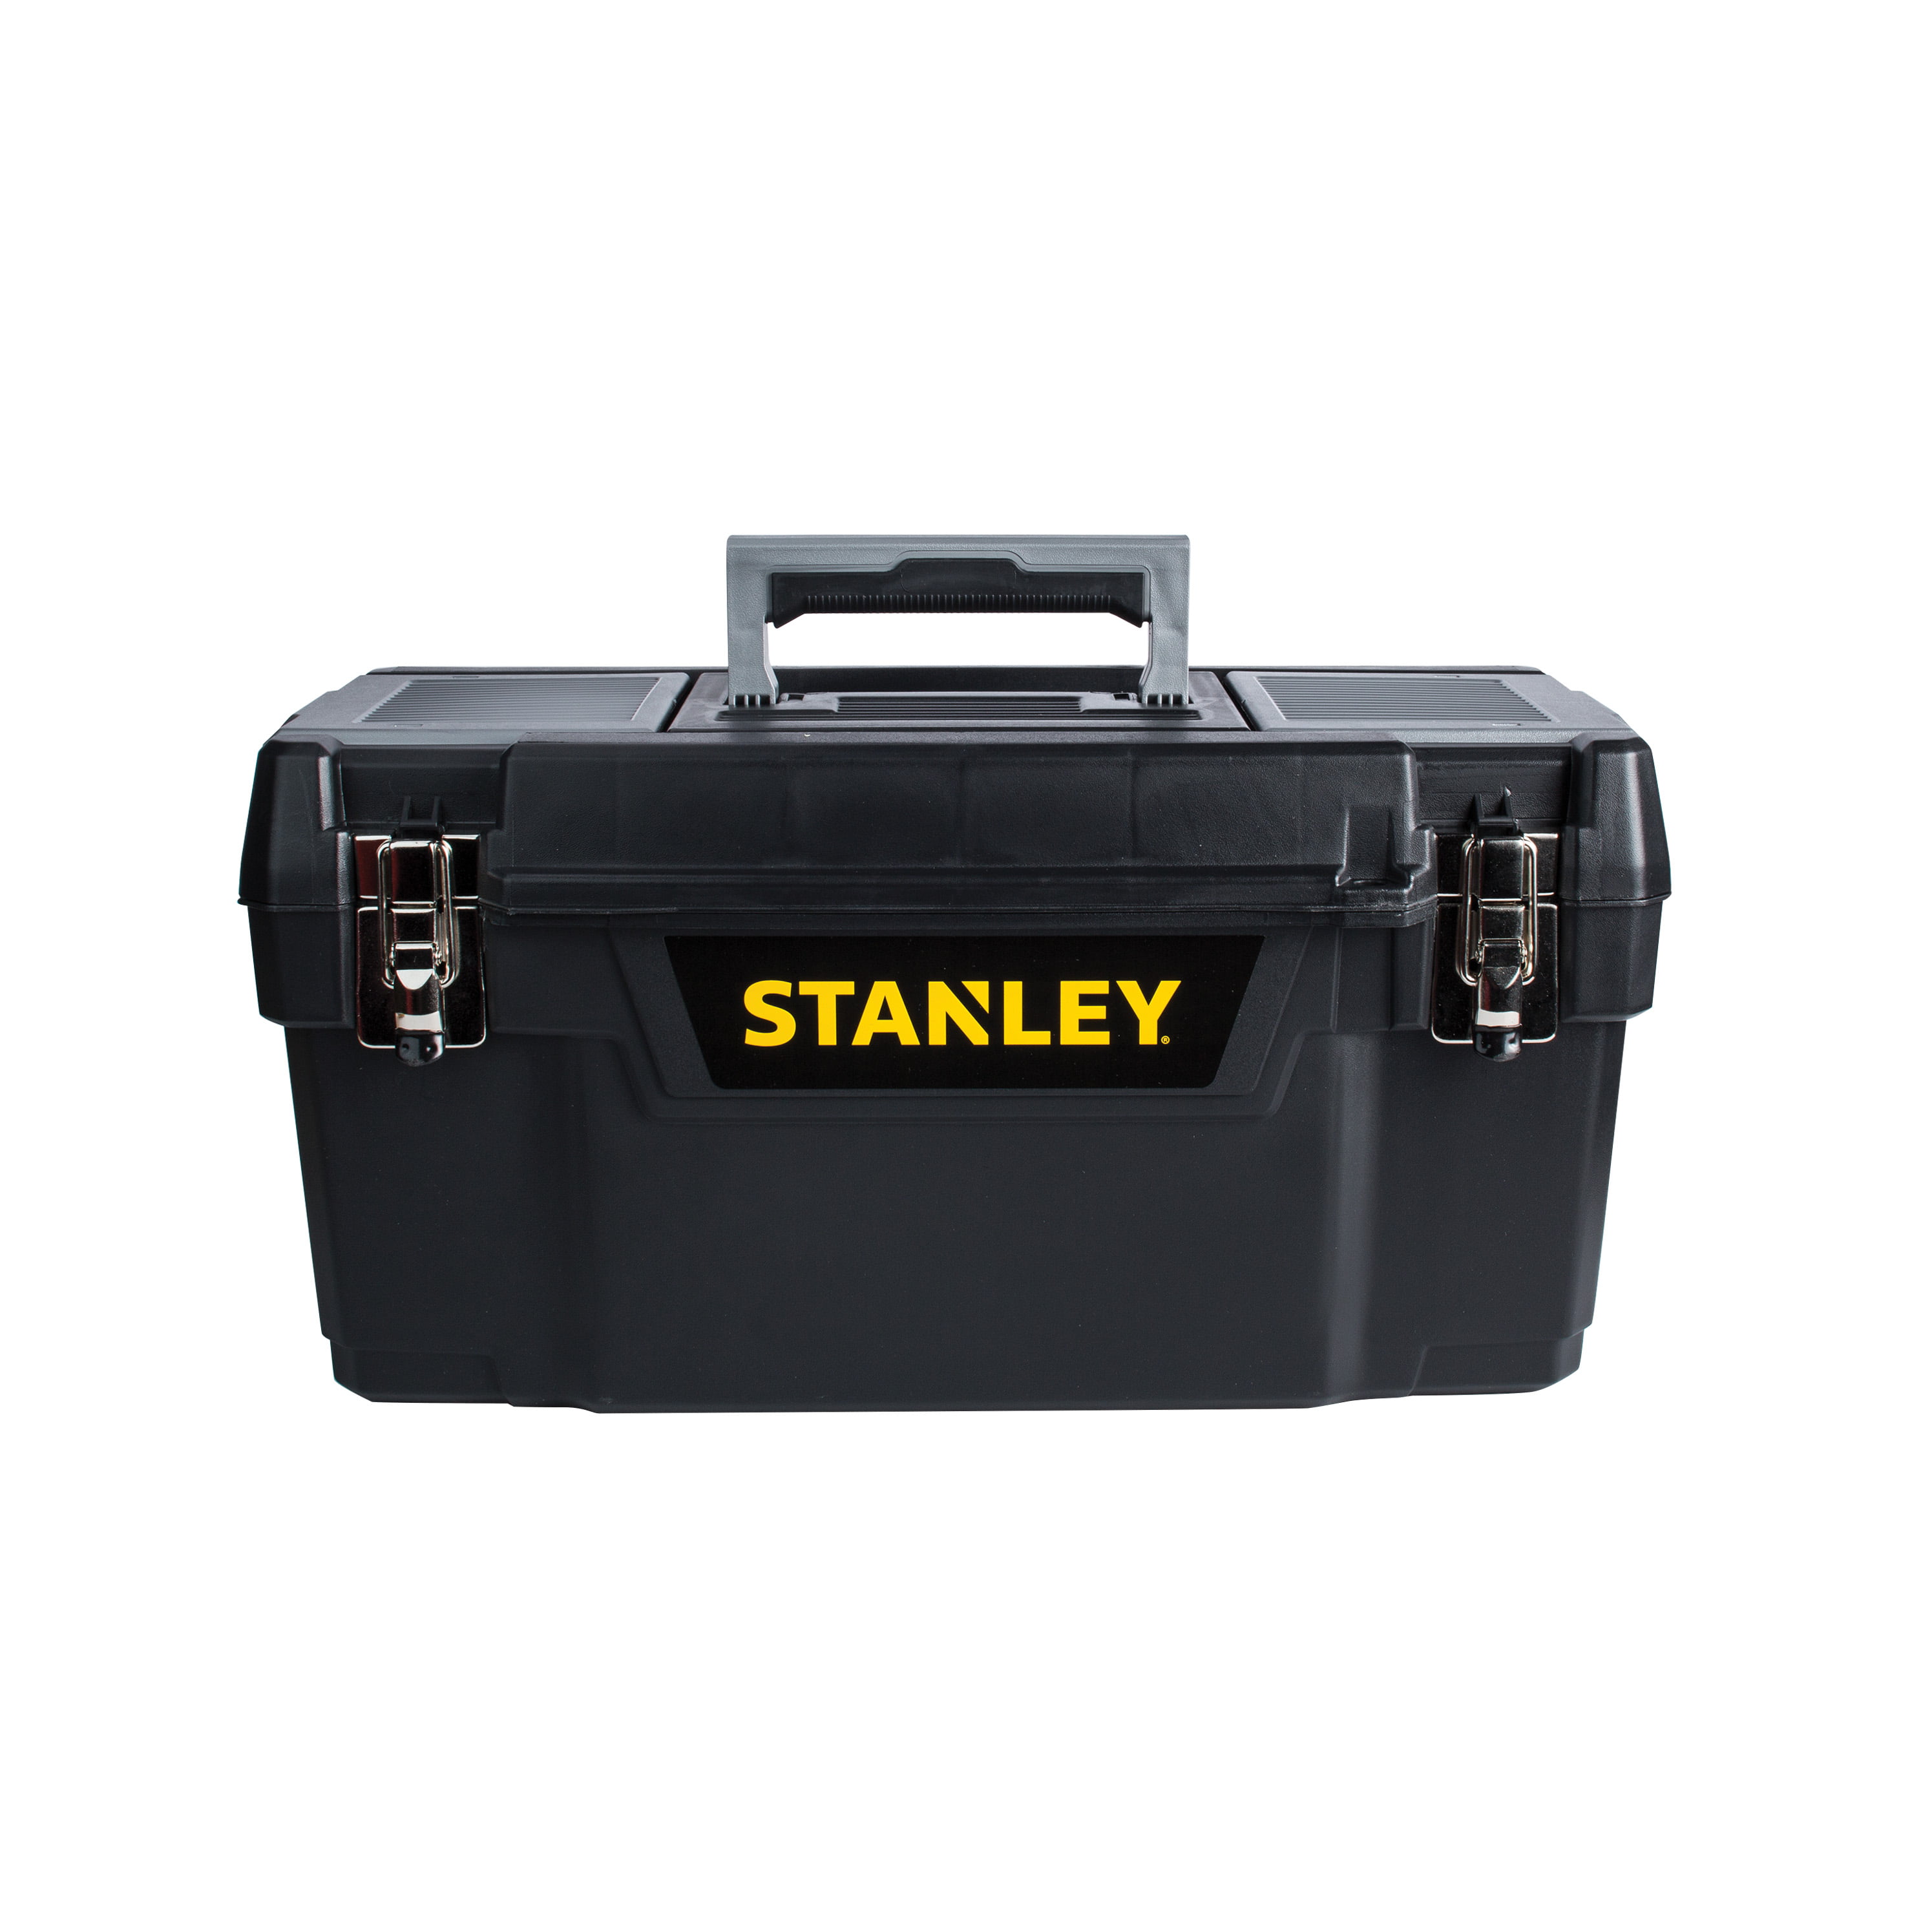 STANLEY Tool Box Set: 19 in Overall Wd, 12 5/16 in Overall Dp, 9 3/5 in  Overall Ht, Black